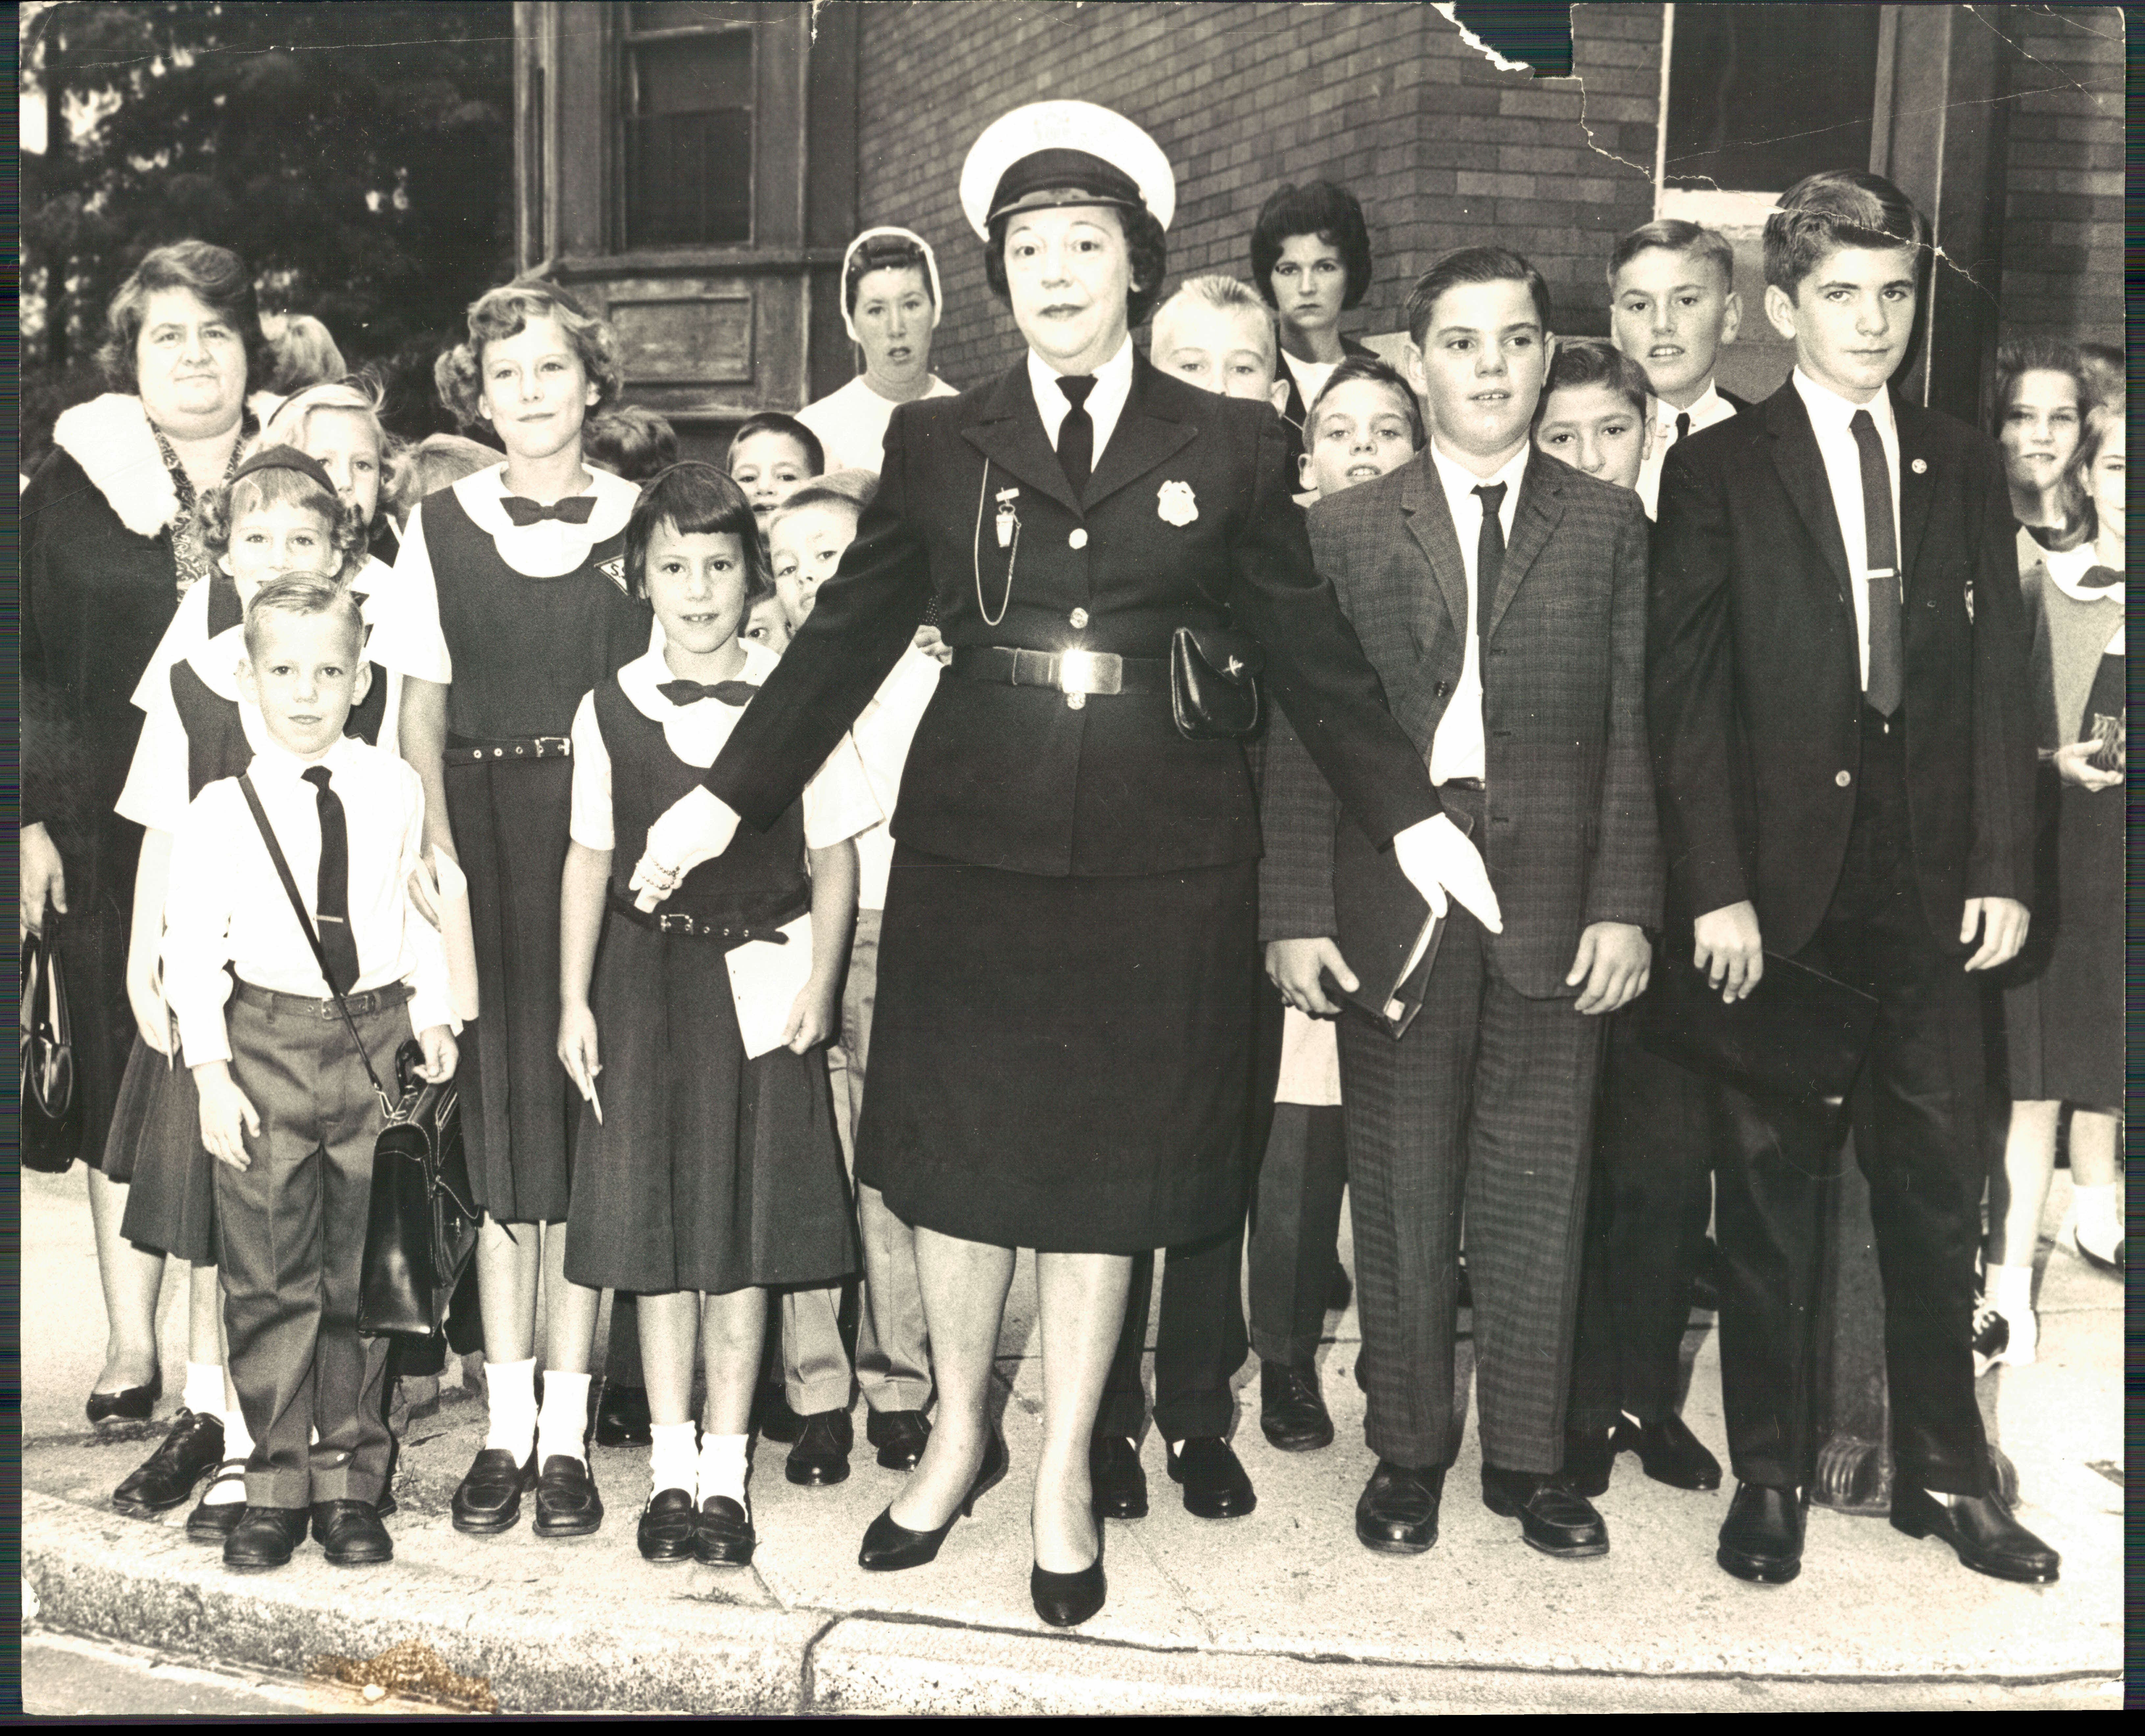 September 5, 1963-THE EAGER BEAVERS Mrs. Naomi Fitzhugh, a school crossing guard, holds back students at Twenty-Seventh street and Maryland avenue who were en route to S. S. Philip and James School. Photo by Sun photographer Walter McCardell. BAQ-547-BSDate Created: 1963-09-05 Copyright Notice: Baltimore Sun Folder Description: Schools, Baltimore Re-opening Folder Extended Description: SCHOOLS, BALTIMORE REOPENING Title: SCHOOLS, BALTIMORE REOPENING Subject: SCHOOLS, BALTIMORE